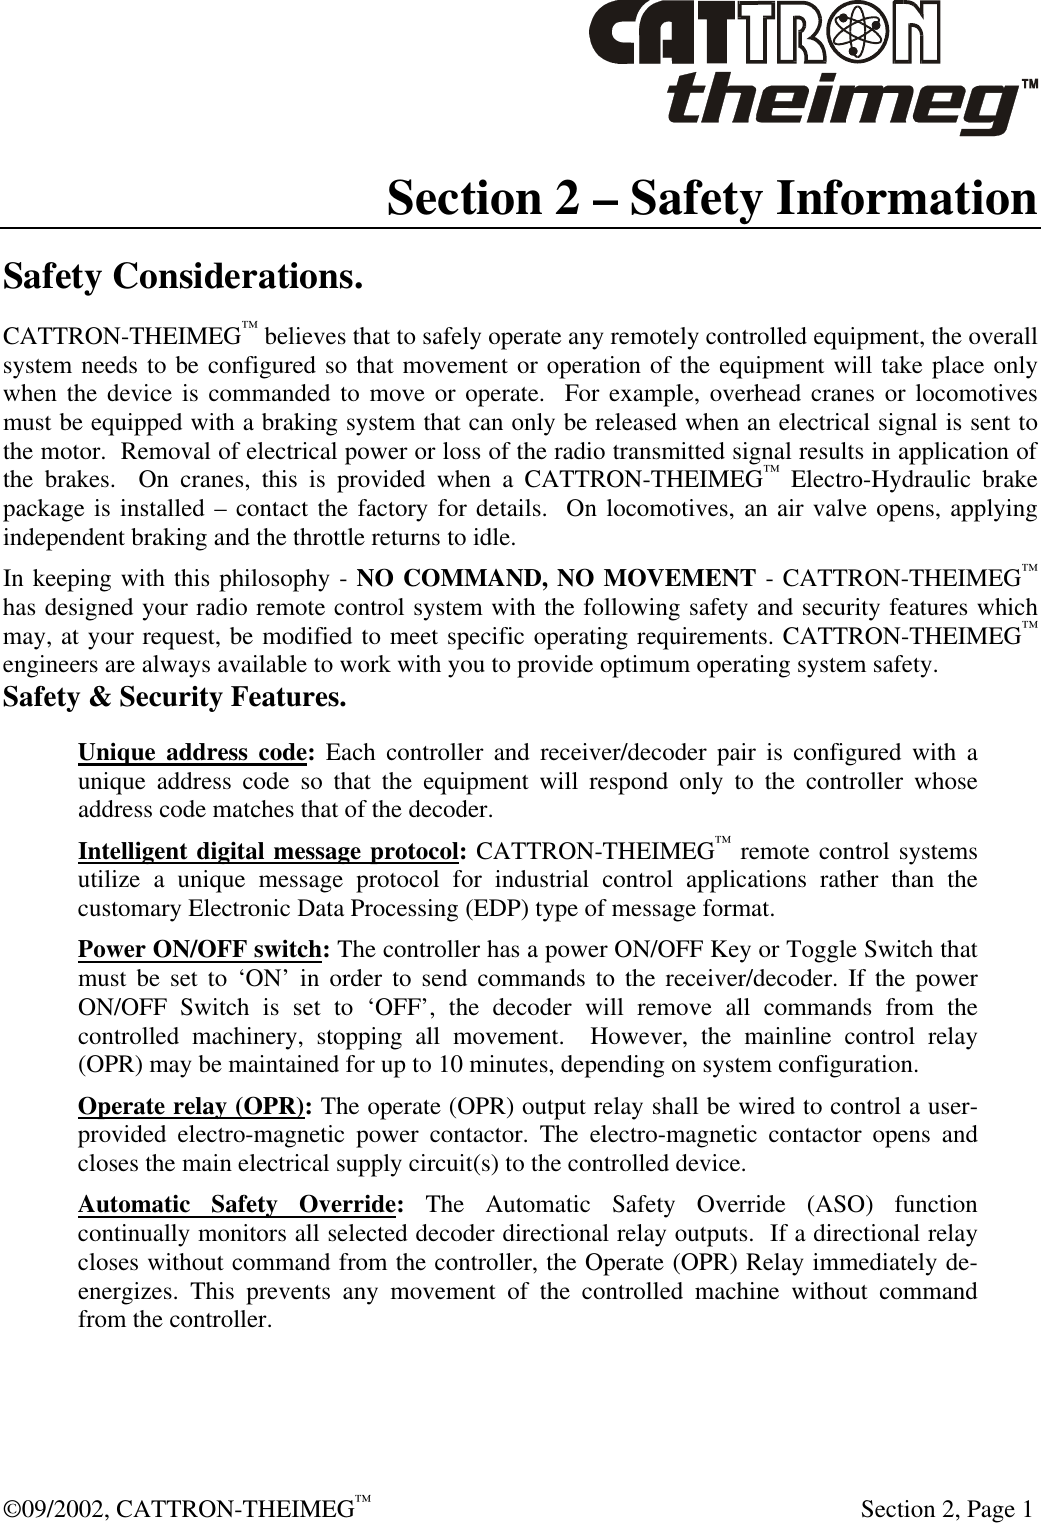  ©09/2002, CATTRON-THEIMEG™   Section 2, Page 1 Section 2 – Safety Information Safety Considerations. CATTRON-THEIMEG™ believes that to safely operate any remotely controlled equipment, the overall system needs to be configured so that movement or operation of the equipment will take place only when the device is commanded to move or operate.  For example, overhead cranes or locomotives must be equipped with a braking system that can only be released when an electrical signal is sent to the motor.  Removal of electrical power or loss of the radio transmitted signal results in application of the brakes.  On cranes, this is provided when a CATTRON-THEIMEG™ Electro-Hydraulic brake package is installed – contact the factory for details.  On locomotives, an air valve opens, applying independent braking and the throttle returns to idle.  In keeping with this philosophy - NO COMMAND, NO MOVEMENT - CATTRON-THEIMEG™ has designed your radio remote control system with the following safety and security features which may, at your request, be modified to meet specific operating requirements. CATTRON-THEIMEG™ engineers are always available to work with you to provide optimum operating system safety.  Safety &amp; Security Features. Unique address code: Each controller and receiver/decoder pair is configured with a unique address code so that the equipment will respond only to the controller whose address code matches that of the decoder. Intelligent digital message protocol: CATTRON-THEIMEG™ remote control systems utilize a unique message protocol for industrial control applications rather than the customary Electronic Data Processing (EDP) type of message format. Power ON/OFF switch: The controller has a power ON/OFF Key or Toggle Switch that must be set to ‘ON’ in order to send commands to the receiver/decoder. If the power ON/OFF Switch is set to ‘OFF’, the decoder will remove all commands from the controlled machinery, stopping all movement.  However, the mainline control relay (OPR) may be maintained for up to 10 minutes, depending on system configuration. Operate relay (OPR): The operate (OPR) output relay shall be wired to control a user-provided electro-magnetic power contactor. The electro-magnetic contactor opens and closes the main electrical supply circuit(s) to the controlled device. Automatic Safety Override: The Automatic Safety Override (ASO) function continually monitors all selected decoder directional relay outputs.  If a directional relay closes without command from the controller, the Operate (OPR) Relay immediately de-energizes. This prevents any movement of the controlled machine without command from the controller.  